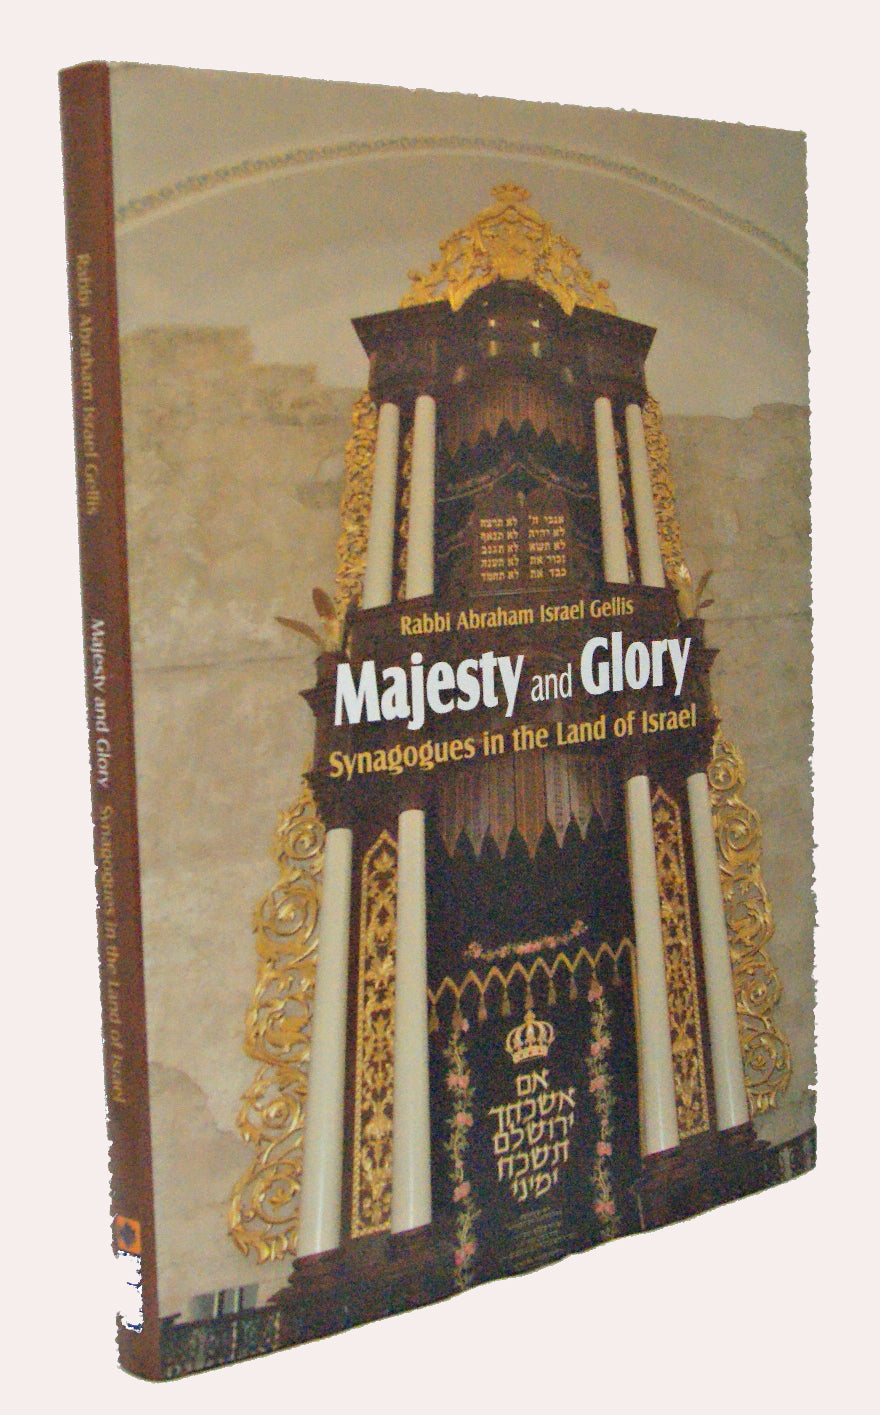 Majesty and Glory - Synagogues in the Land of Israel